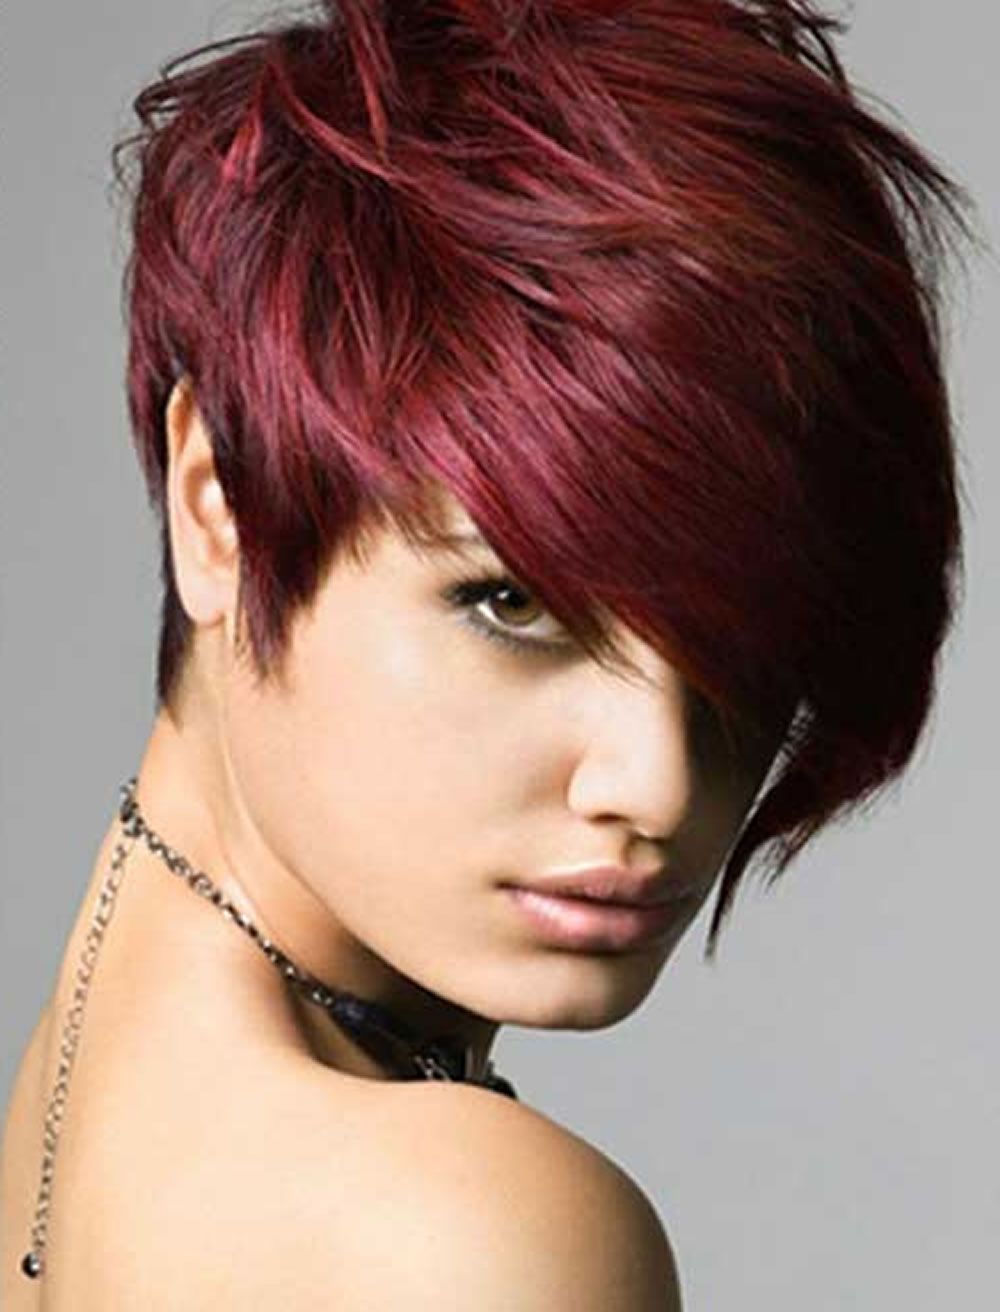 Red Hair Color For Short Hairstyles | 27 Cool Haircut Tutorial For With Regard To Short Haircuts With Red Hair (Photo 3 of 25)